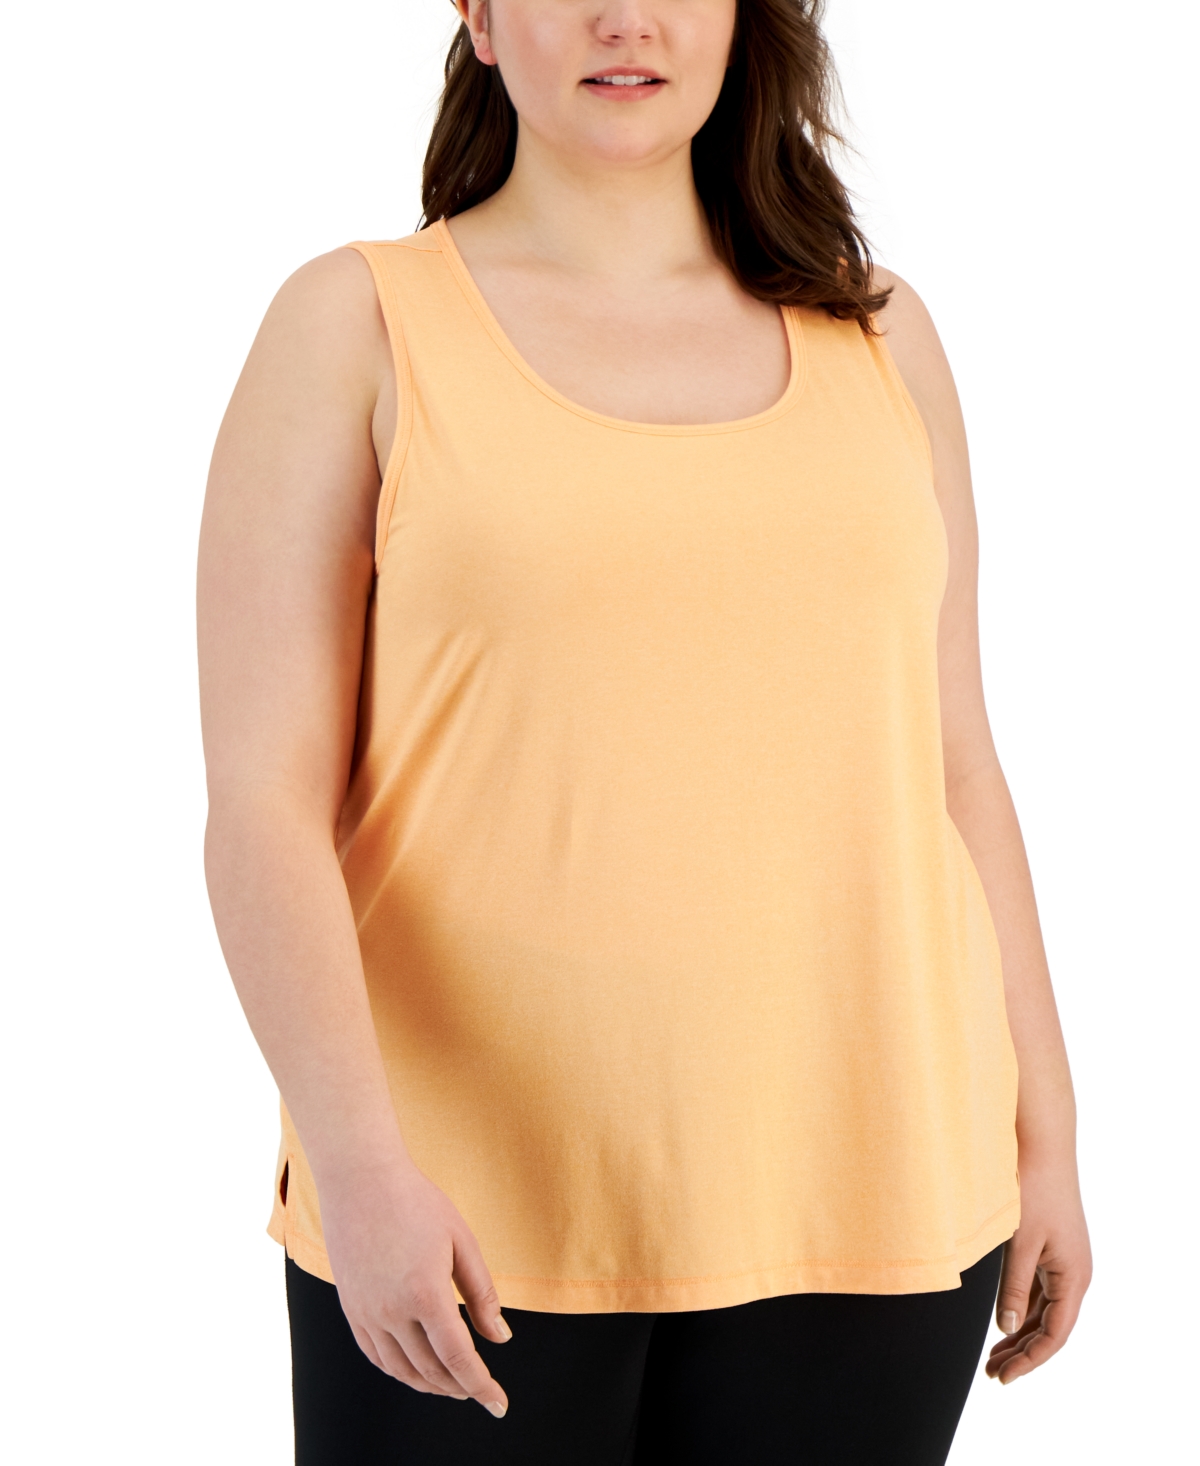 Plus Size Solid Essentials Crewneck Tank Top, Created for Macy's - Melon Sorbet